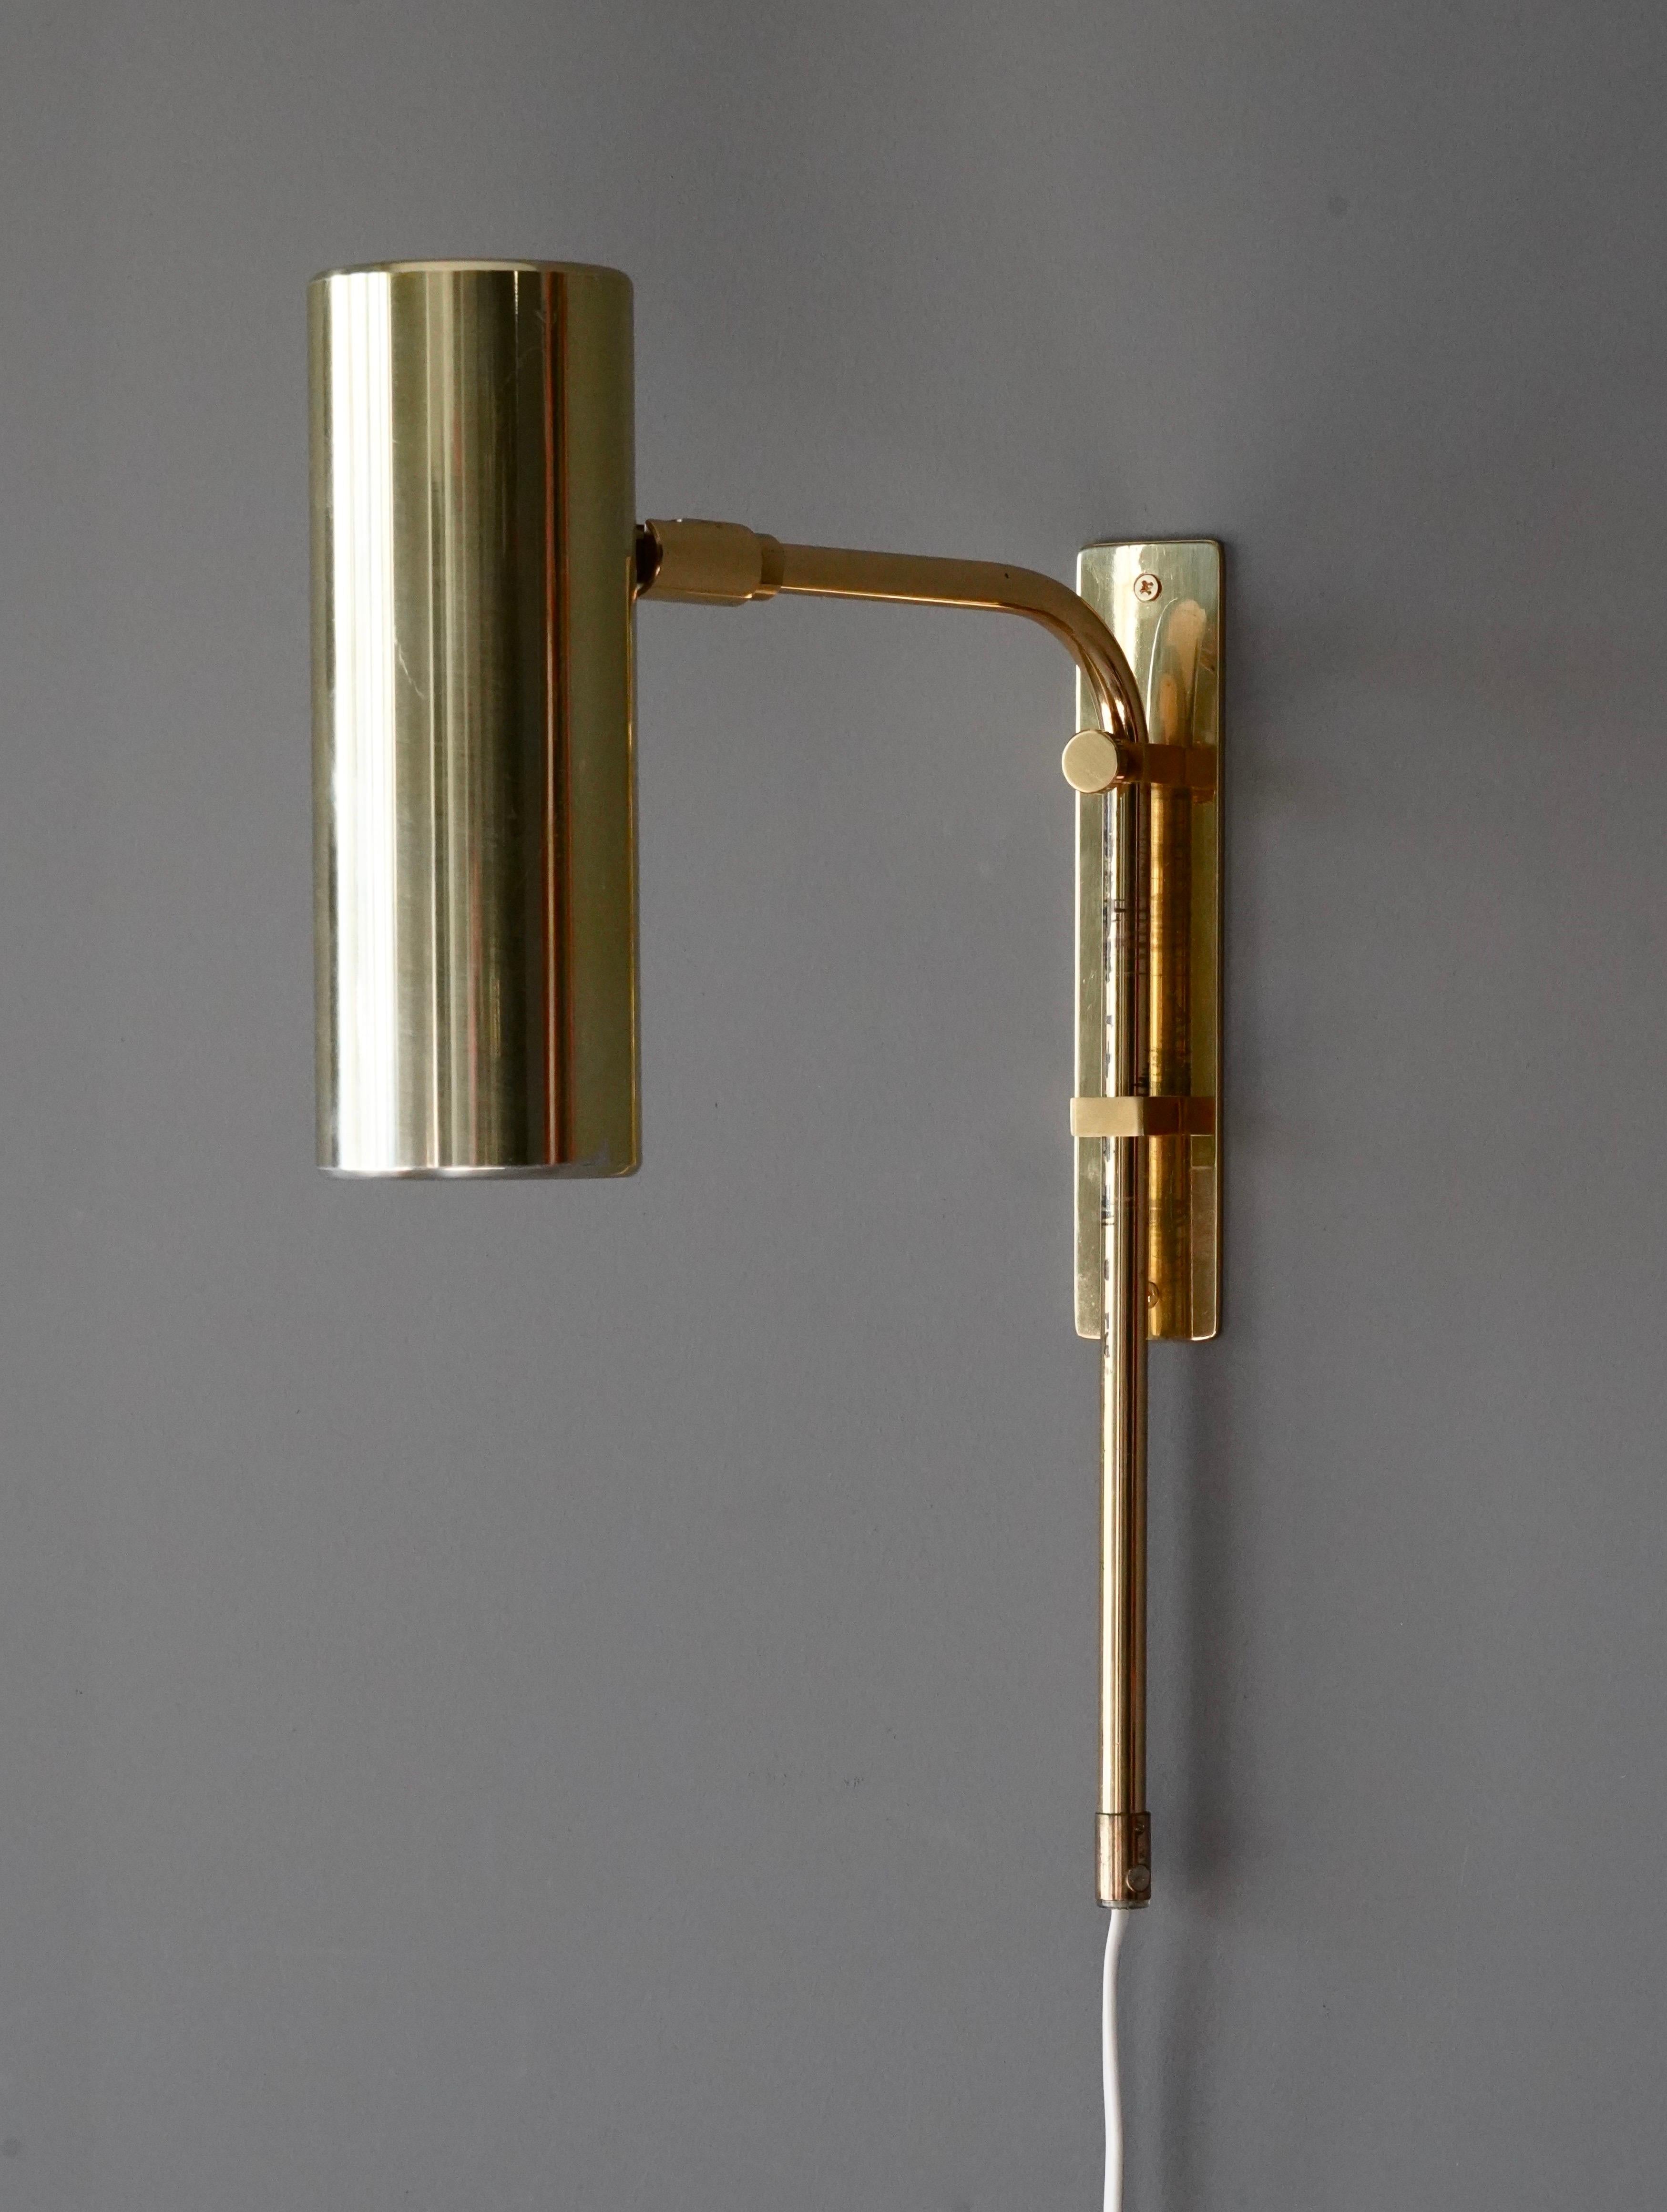 Aan adjustable wall lights / wall sconces. Designed and produced by Bergboms, Sweden, c. 1970s. Labeled.

